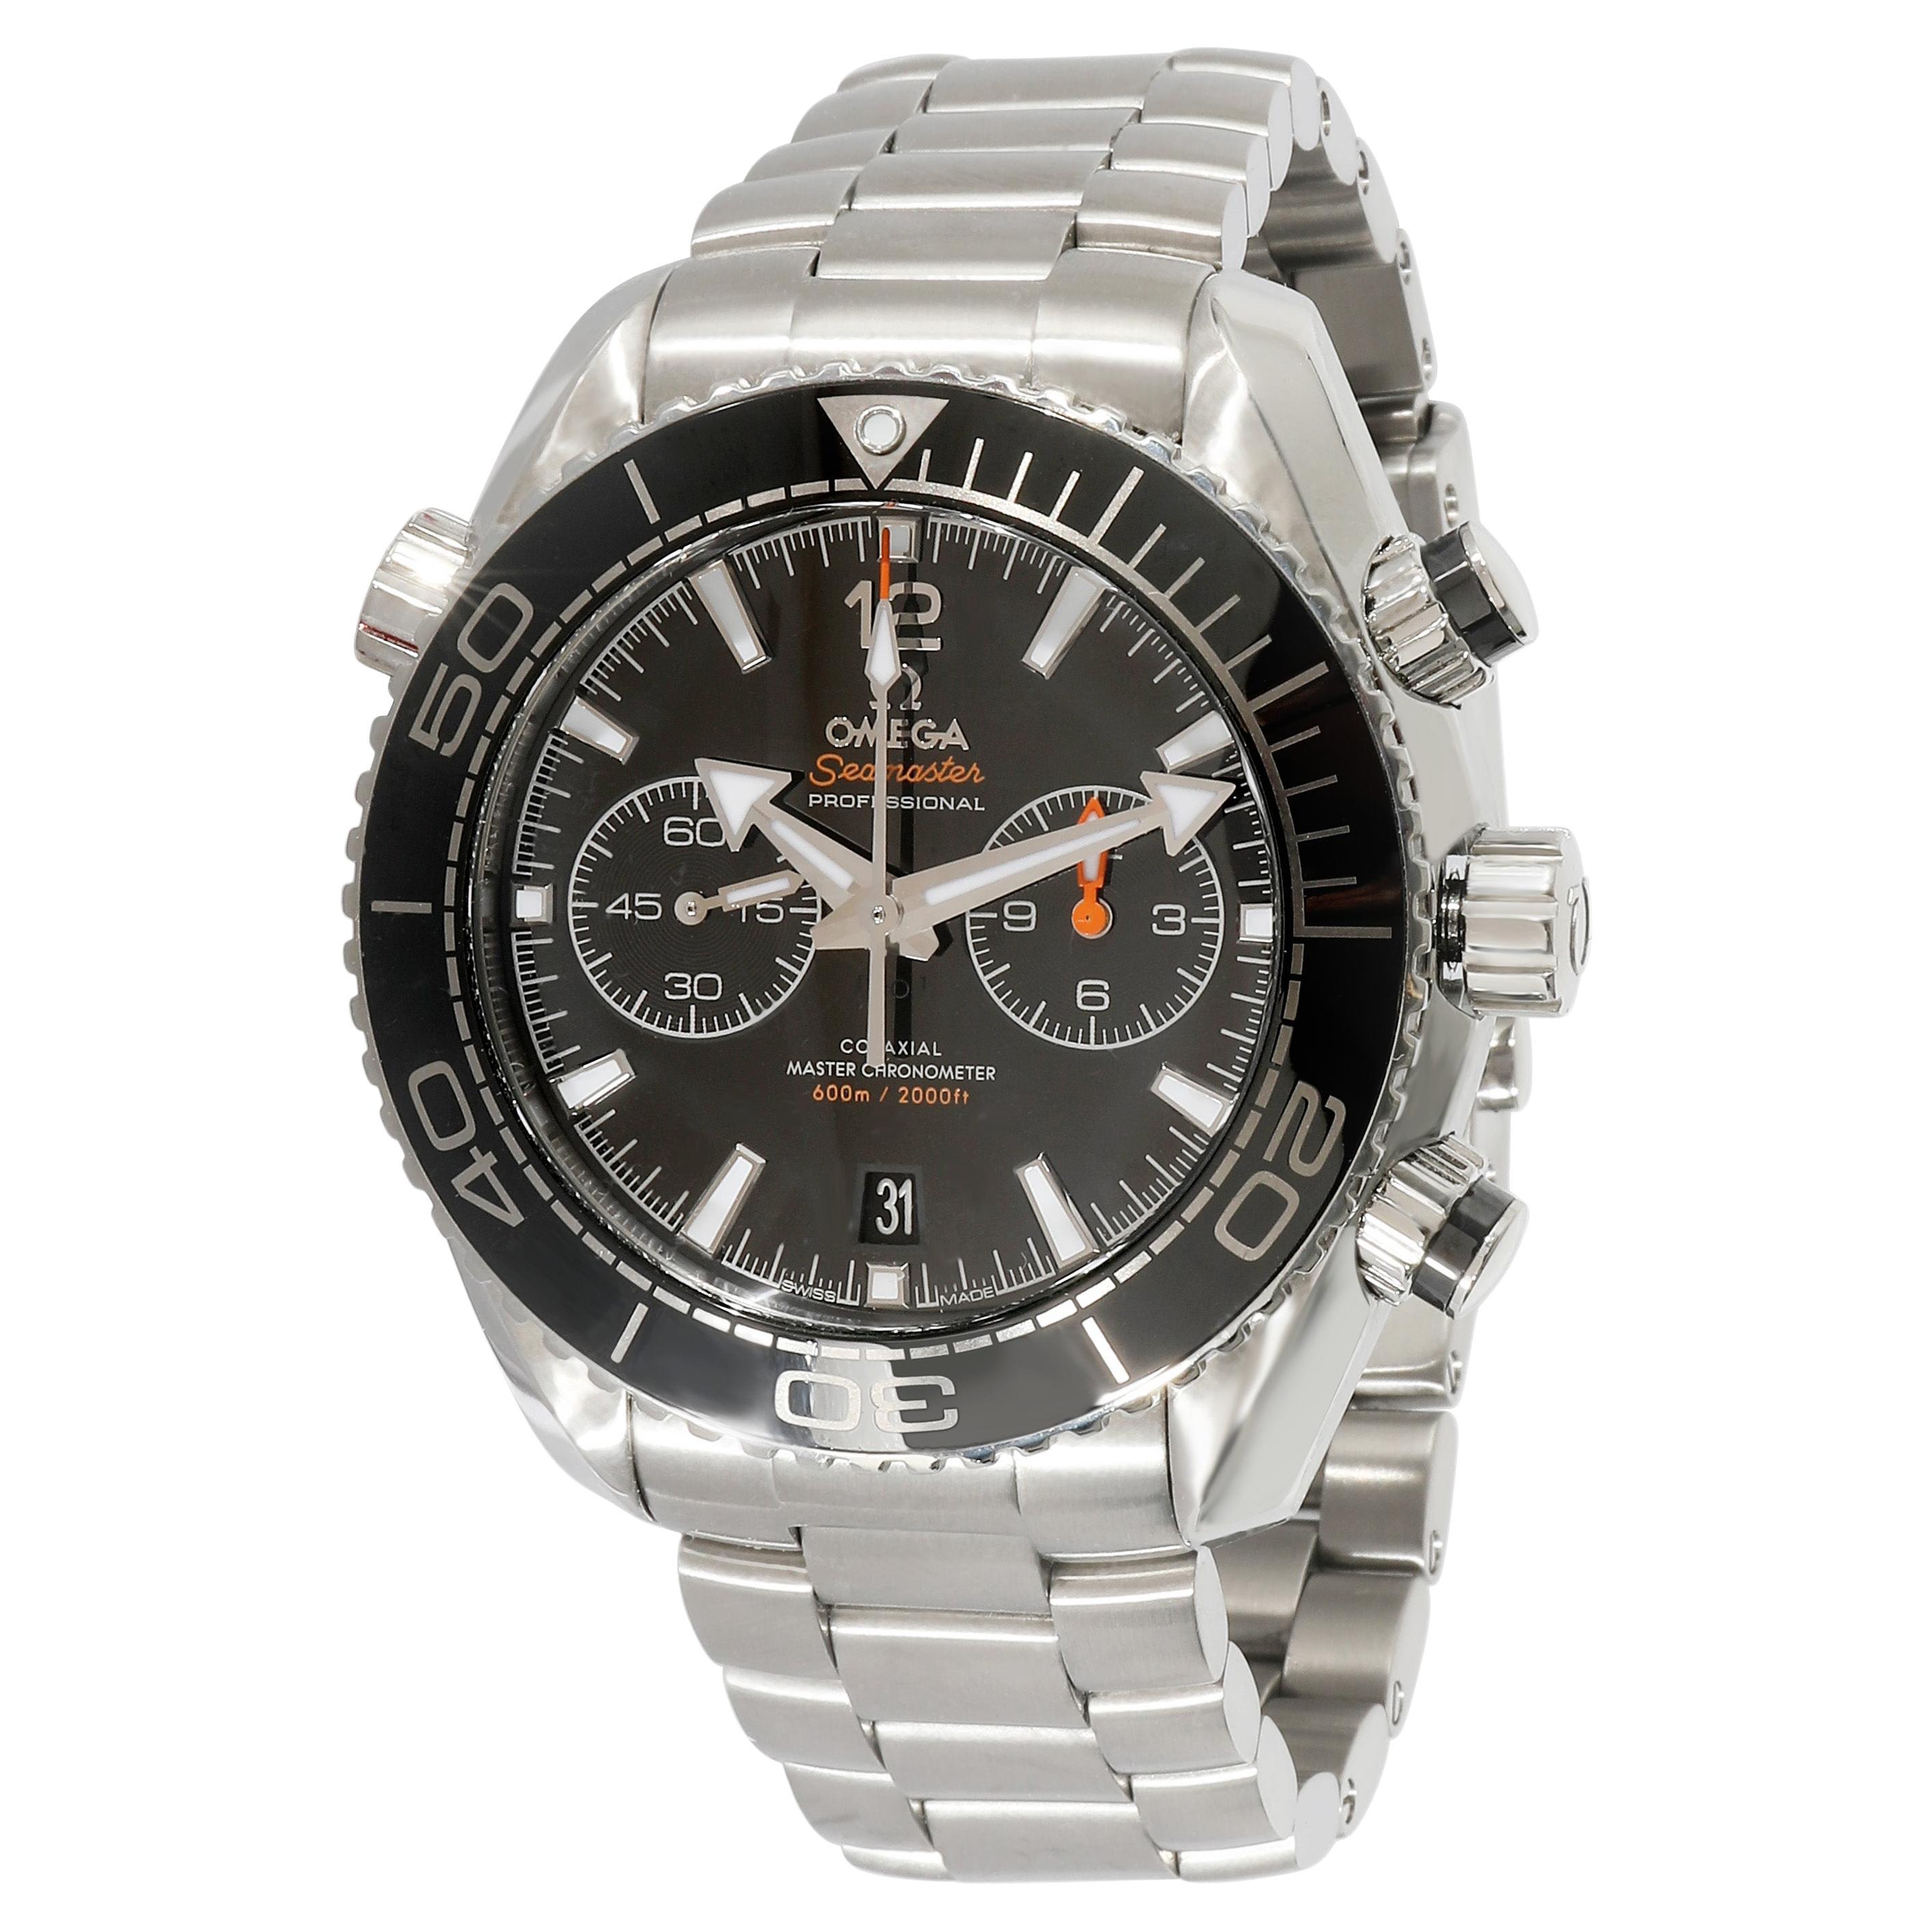 Omega Seamaster Planet Ocean pour hommes 215.30.46.51.01.001  Acier inoxydable